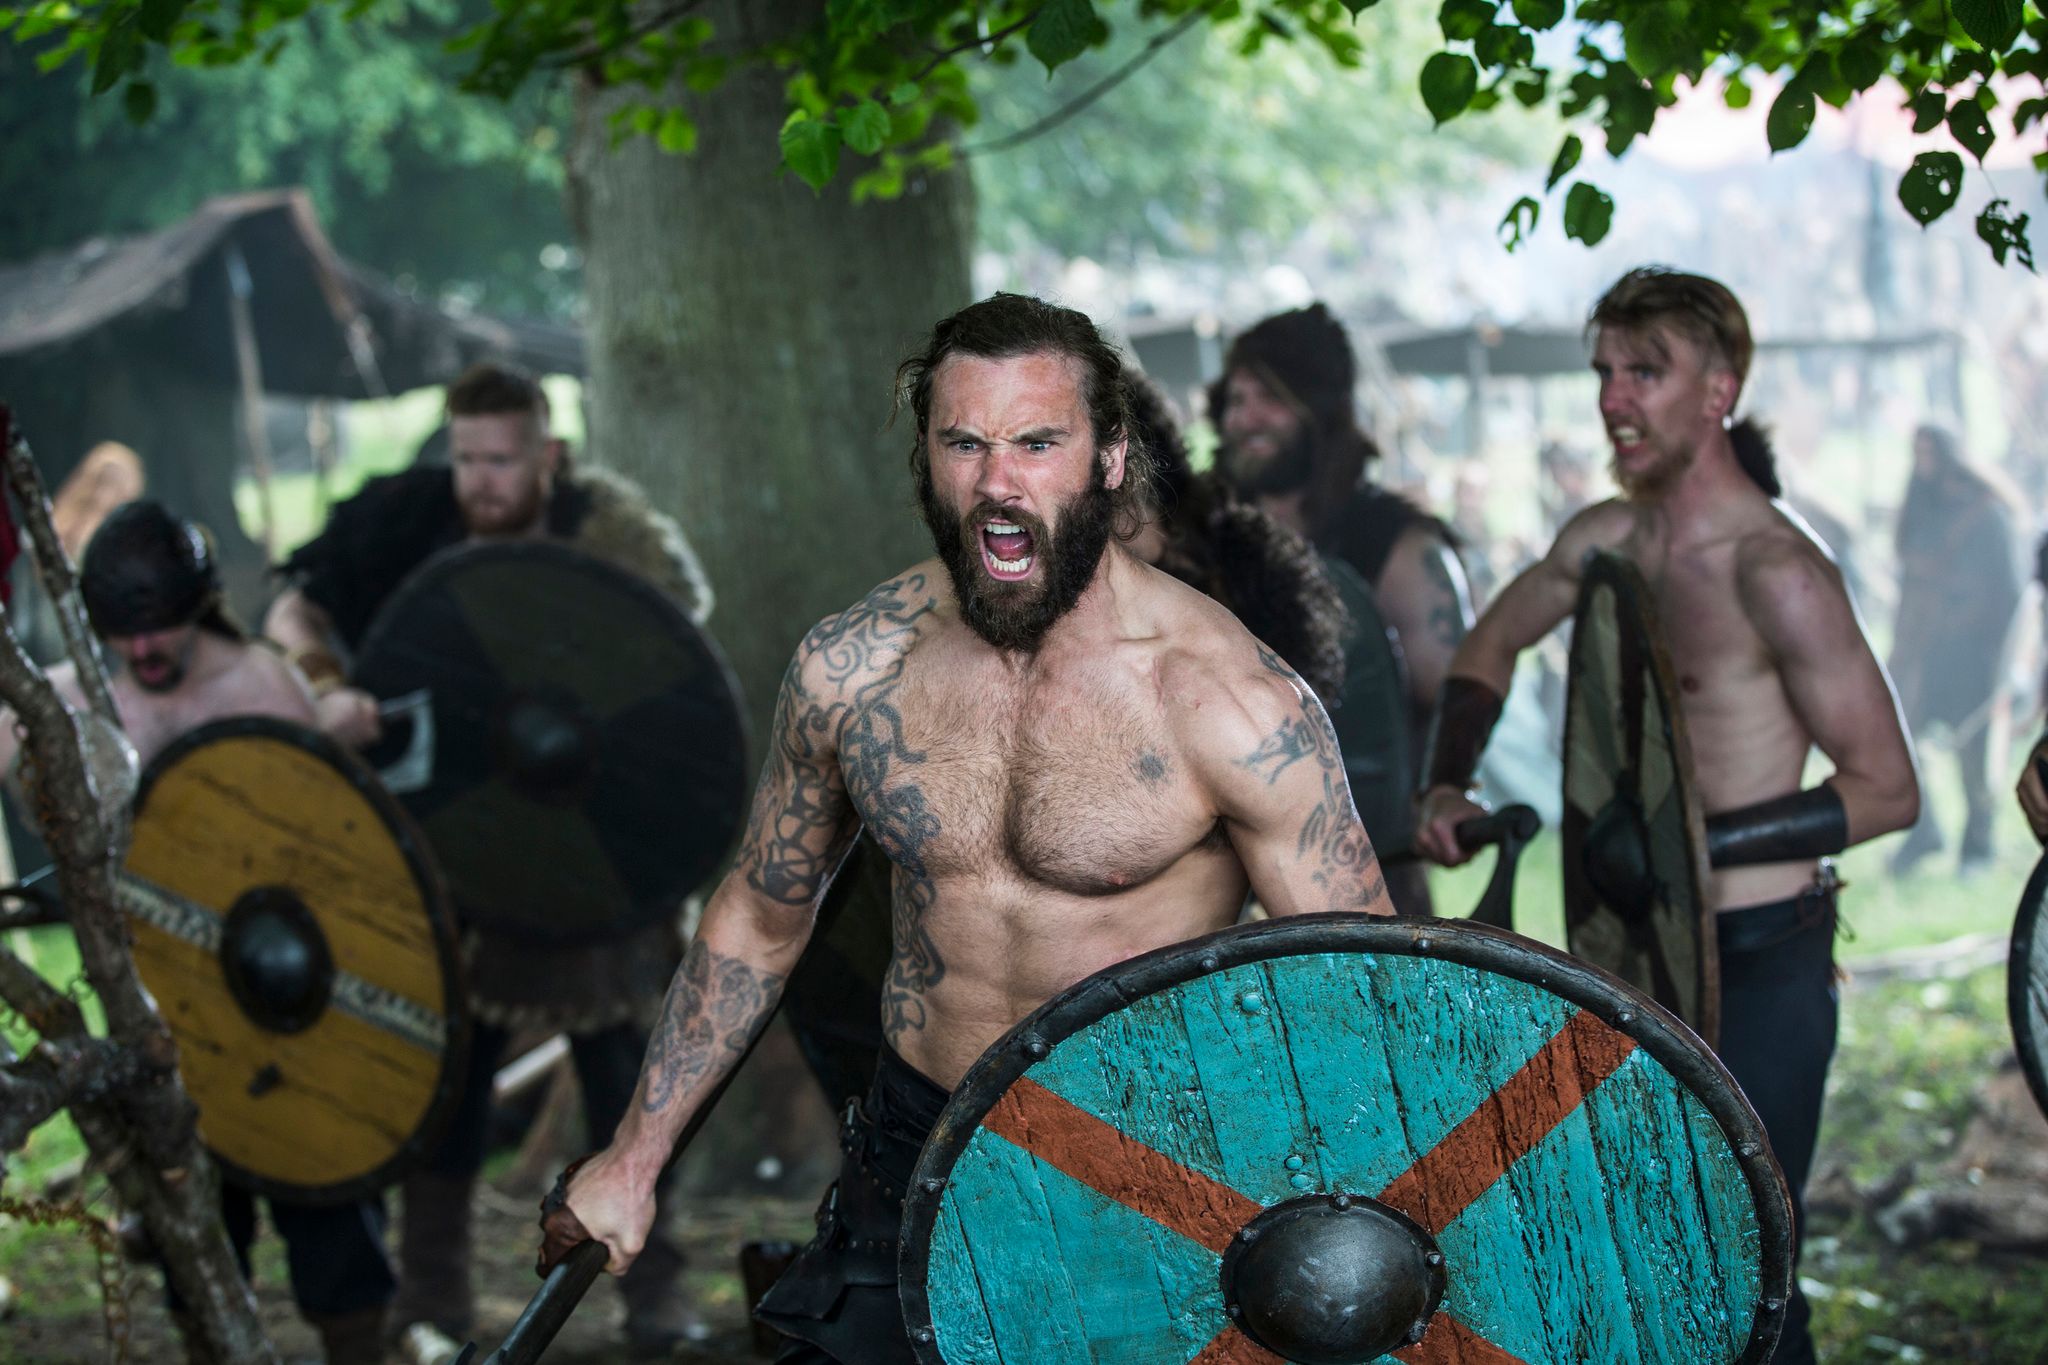 Vikings The 5 Best (& 5 Worst) Episodes